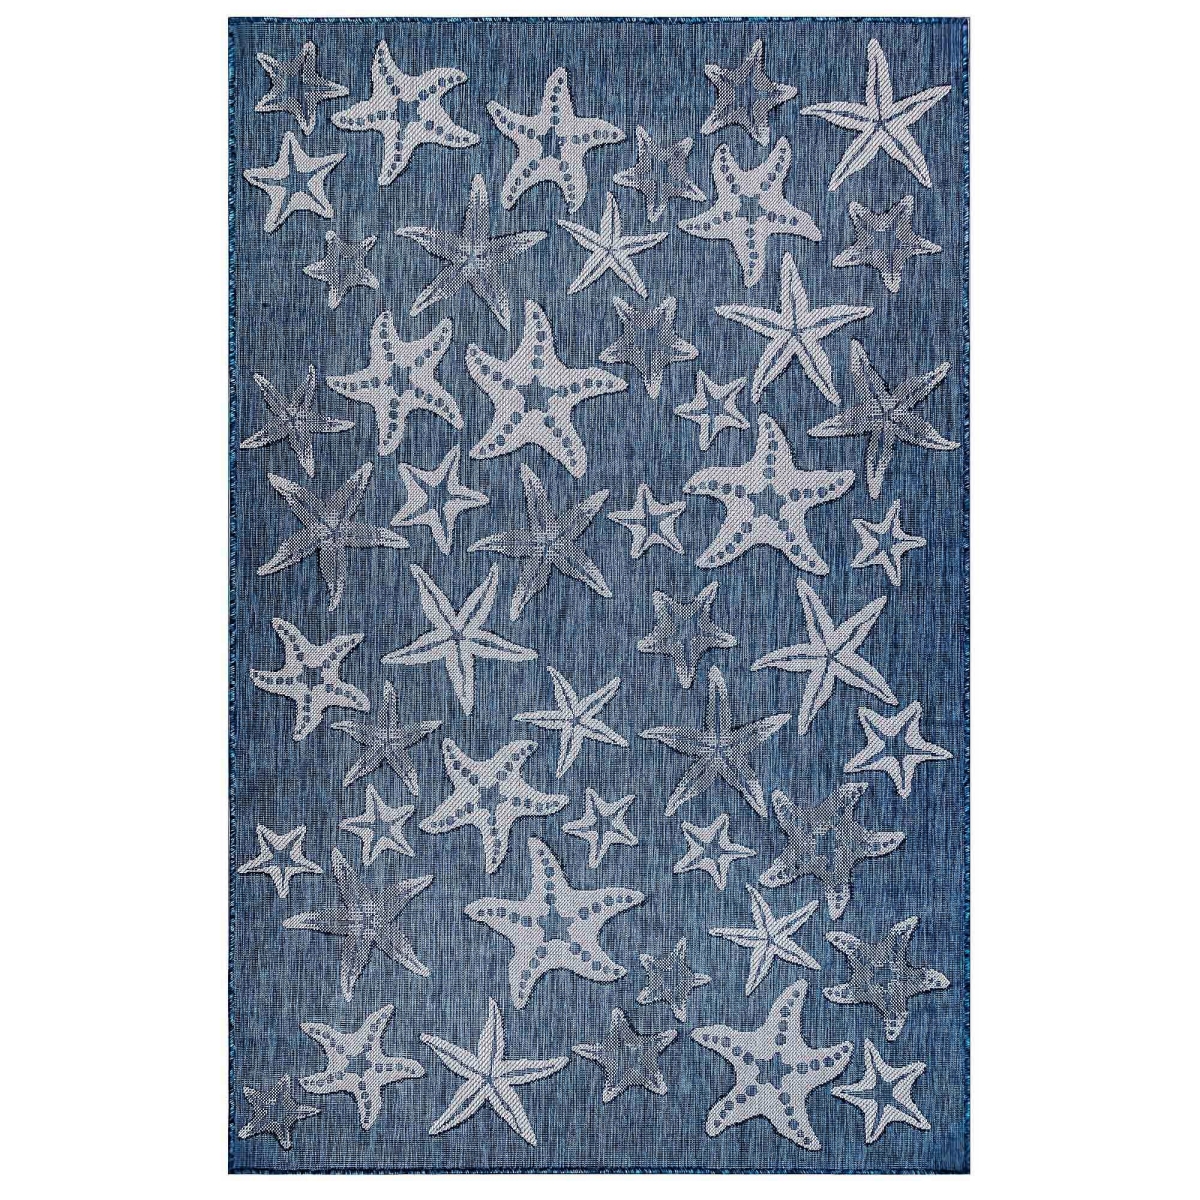 Trans-ocean Imports Cre45841533 39 In. X 59 In. Liora Manne Carmel Starfish Indoor & Outdoor Wilton Woven Rectangle Rug - Navy